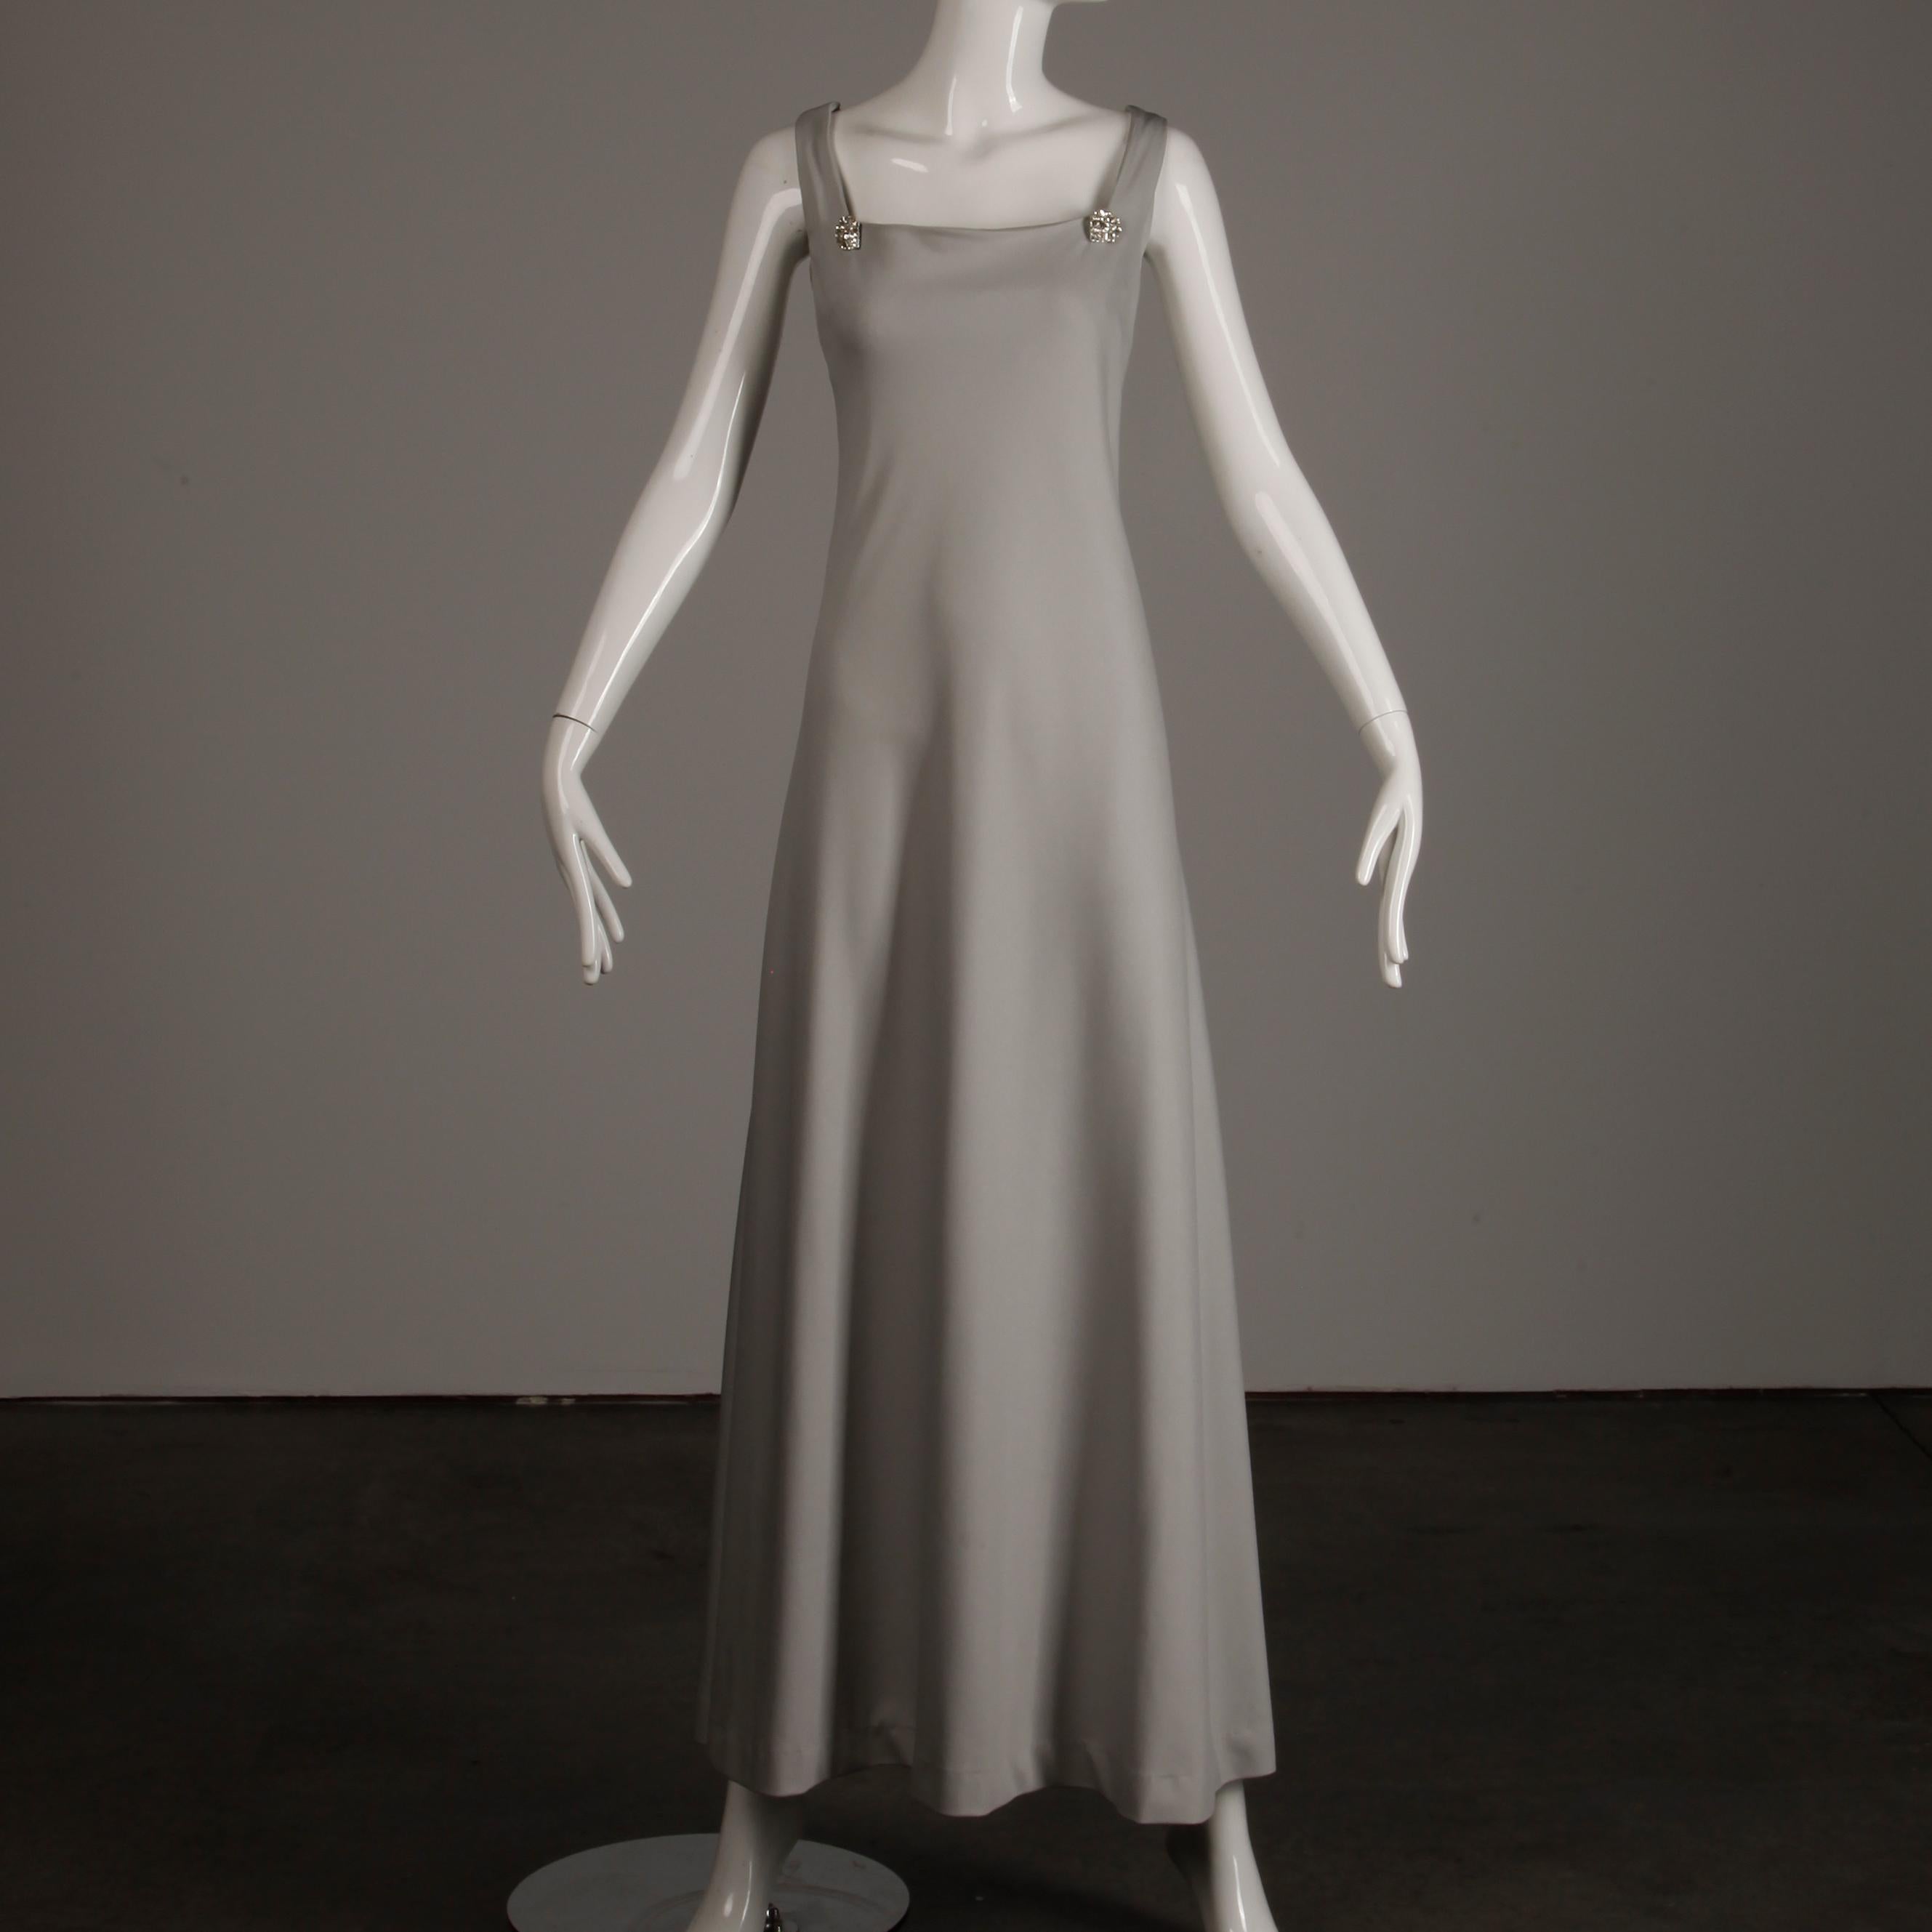 Unlined with rear zip and hook closure and hook closure affixing rhinestones from the dress to the cape. The marked size is 12, and the ensemble fits like a modern medium-large. The bust measures 41